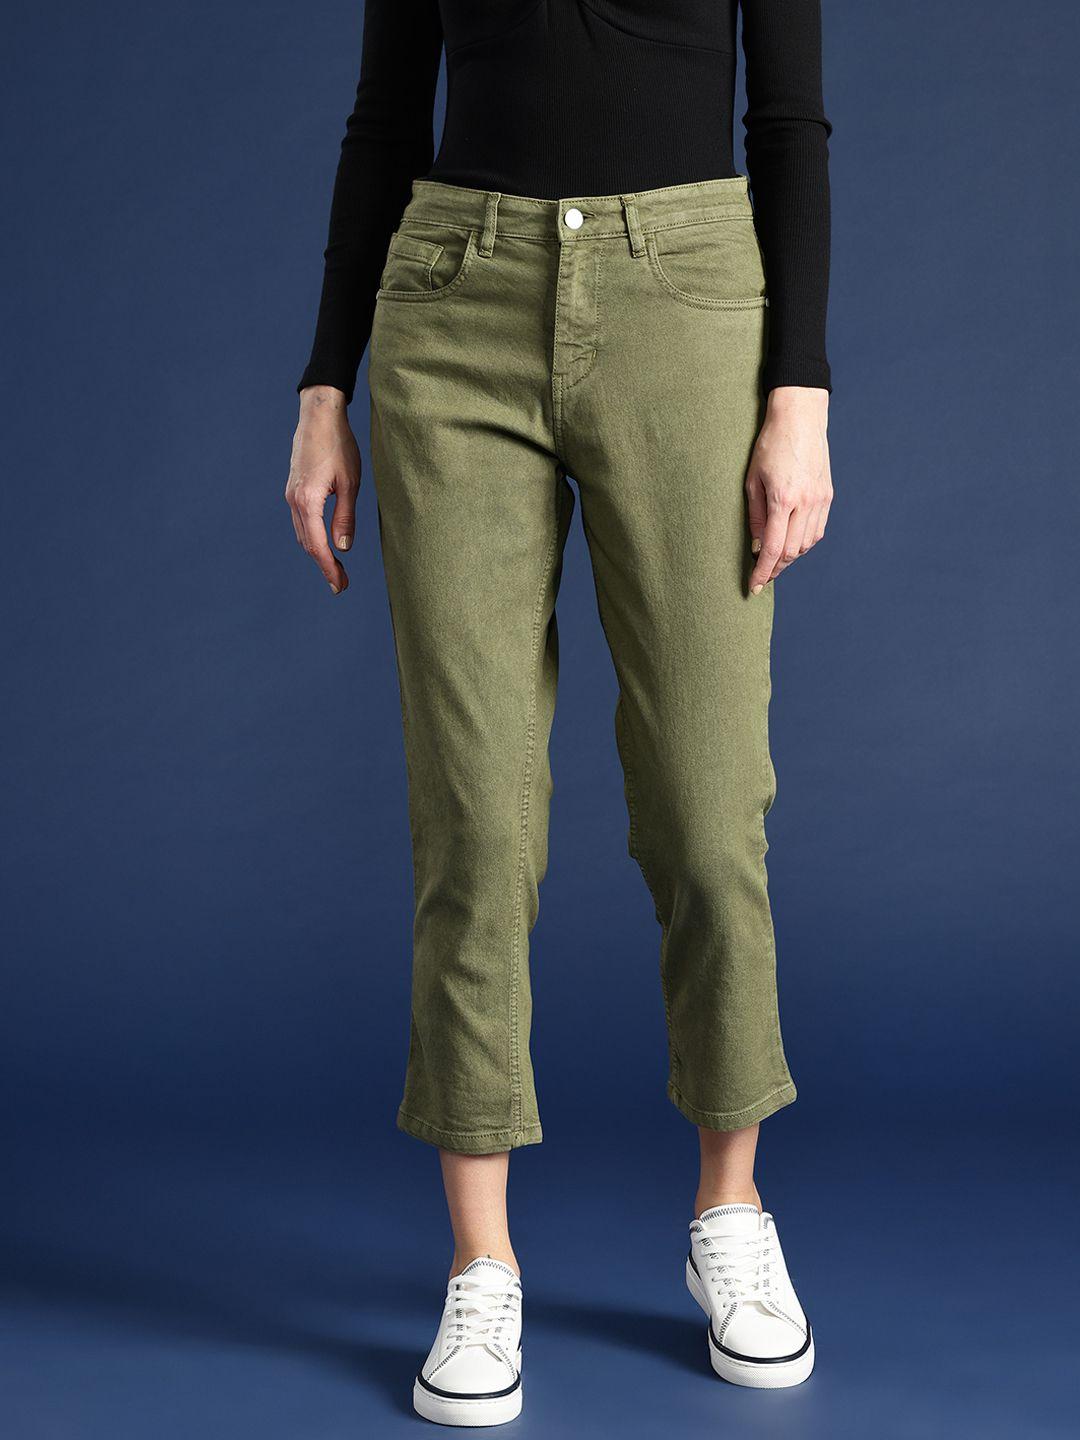 mast & harbour women olive green slim fit high-rise stretchable crop jeans